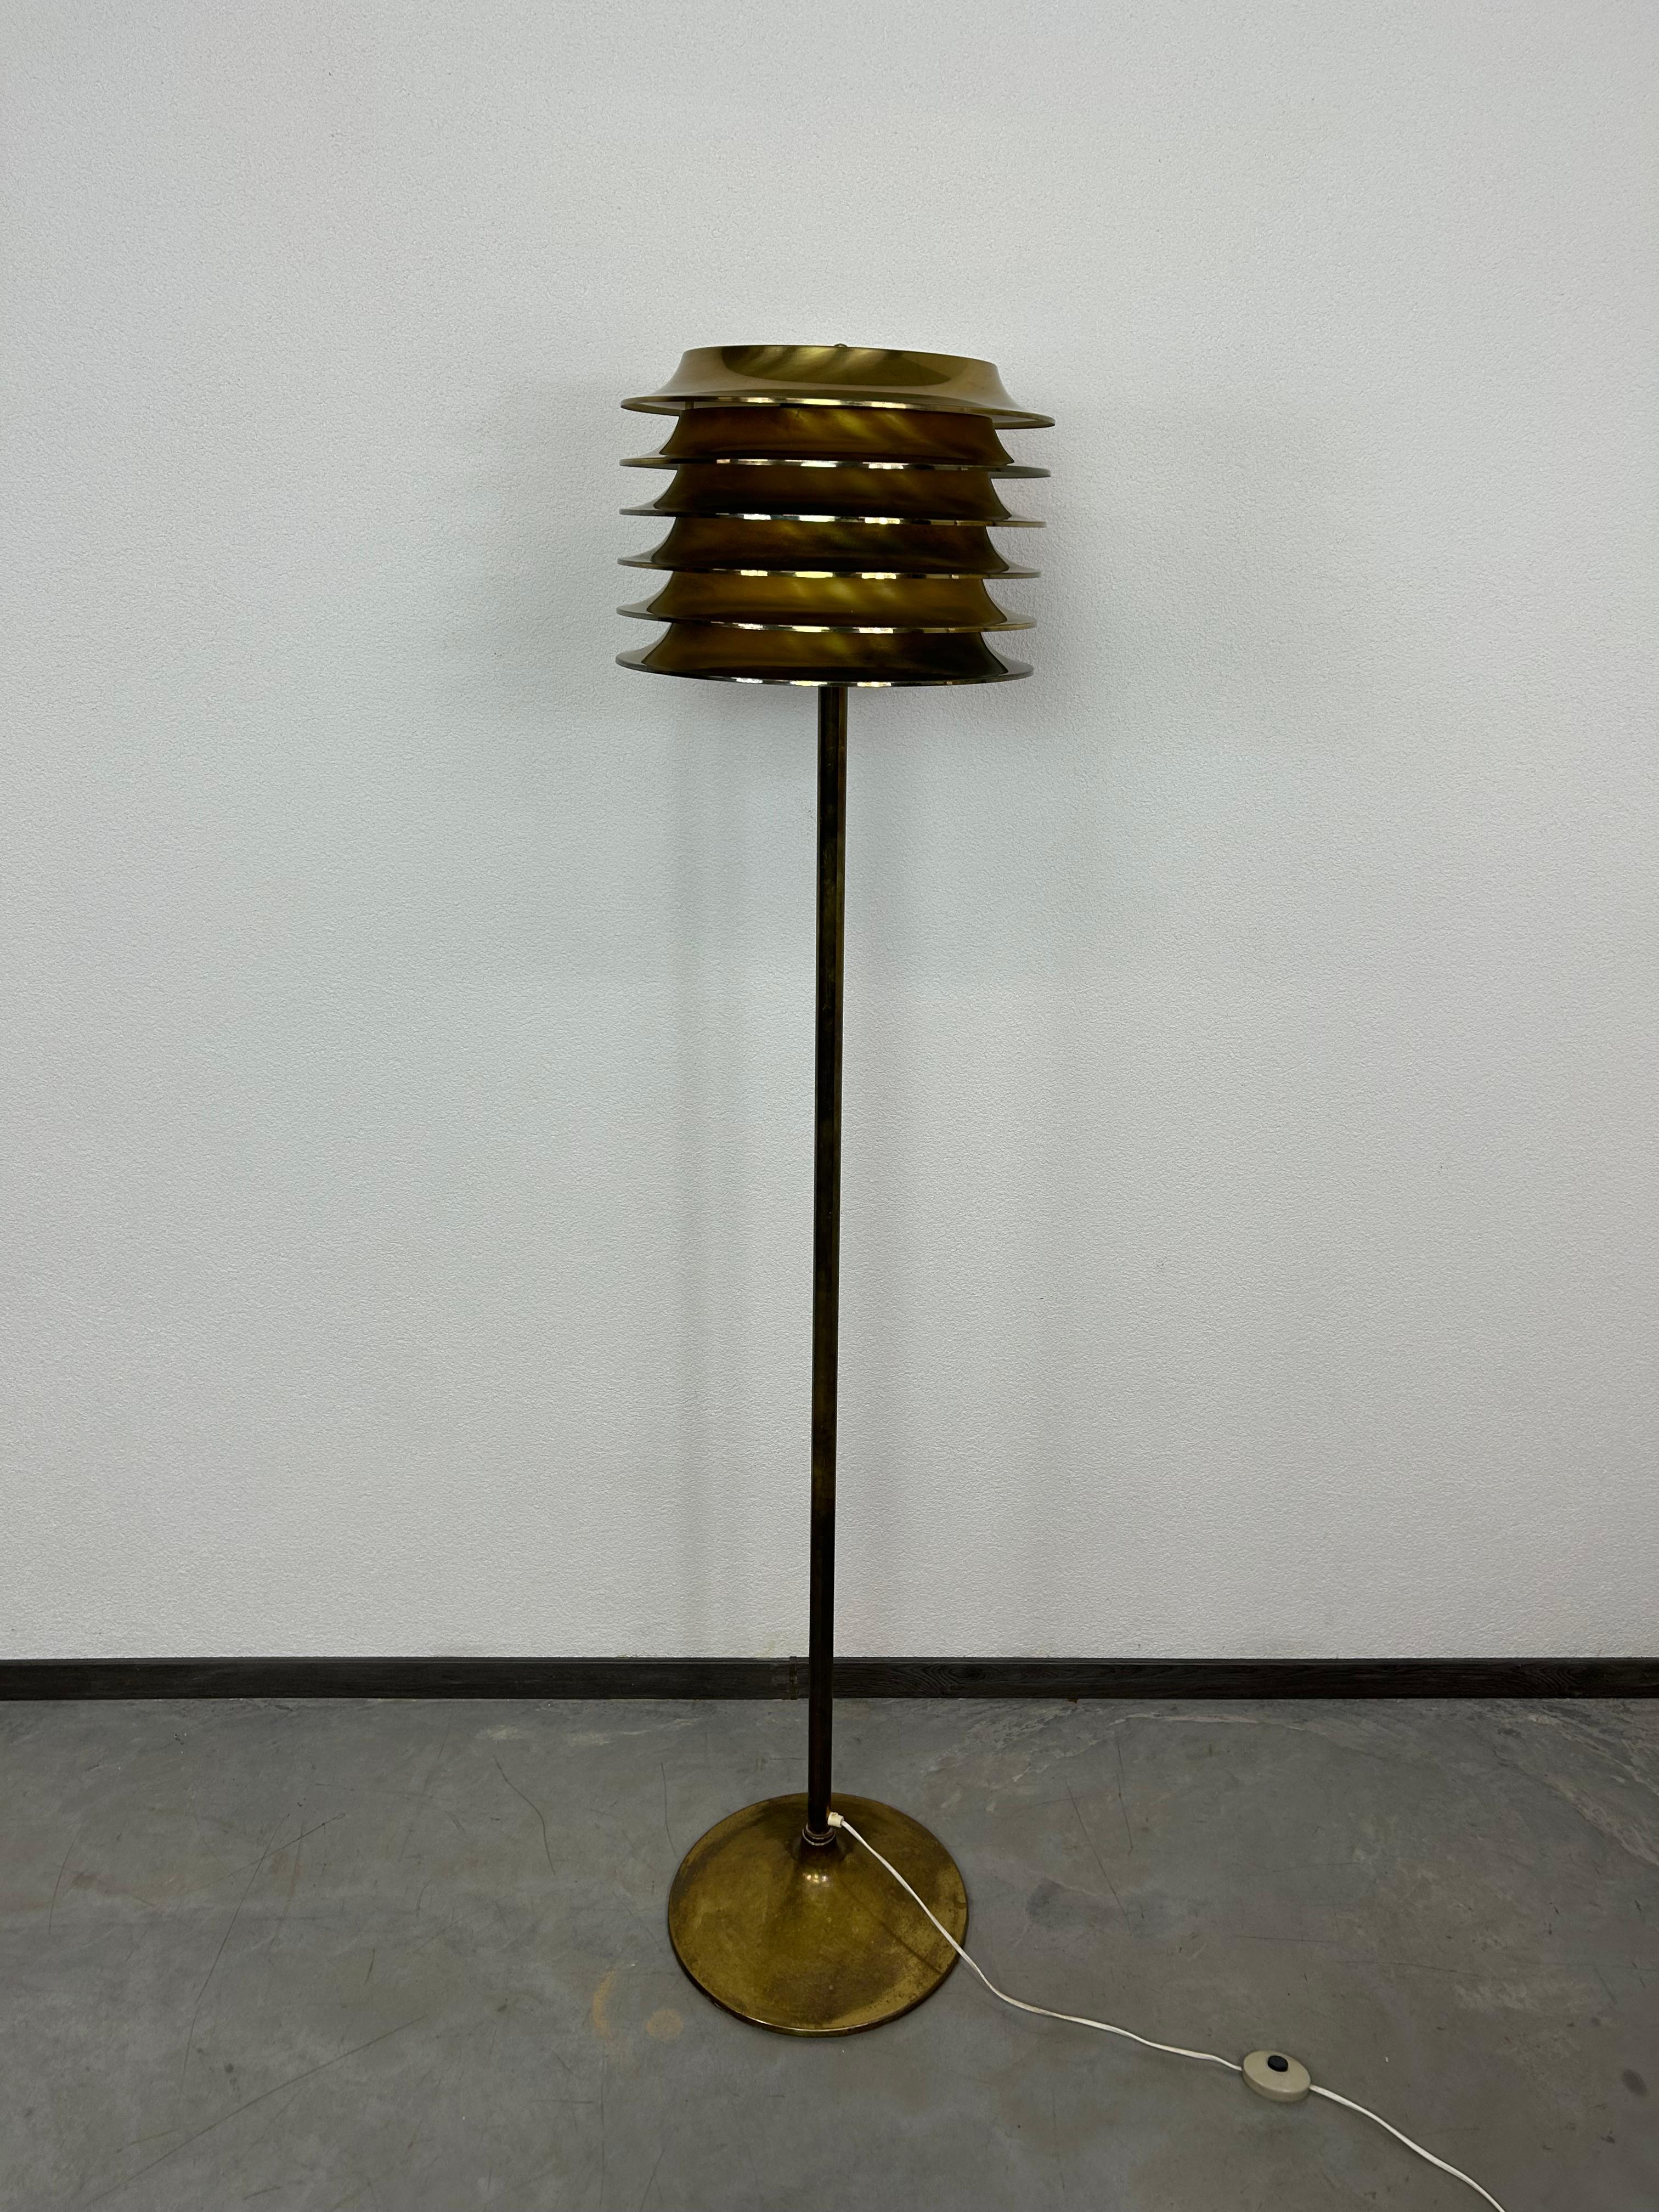 Mid-century design brass floor lamp by Kari Ruokonen for Lynx Finland, signed on the lampshade. Original vintage condition with signs of use. Kari Ruokonen designed lighting for the Palace Hotel in Helsinki in 1952 in cooperation with manufactured